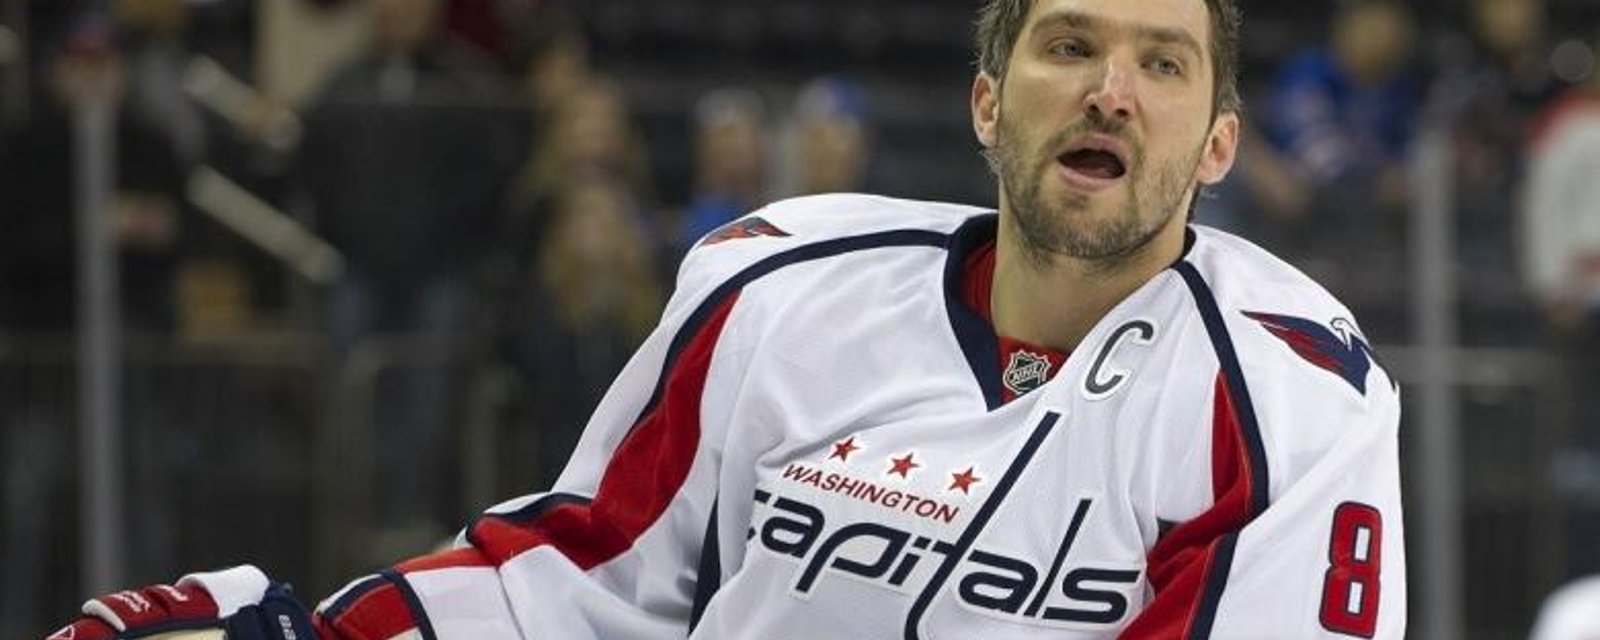 Ovechkin seems to indicate one player is responsible for the Capitals playoff exit.